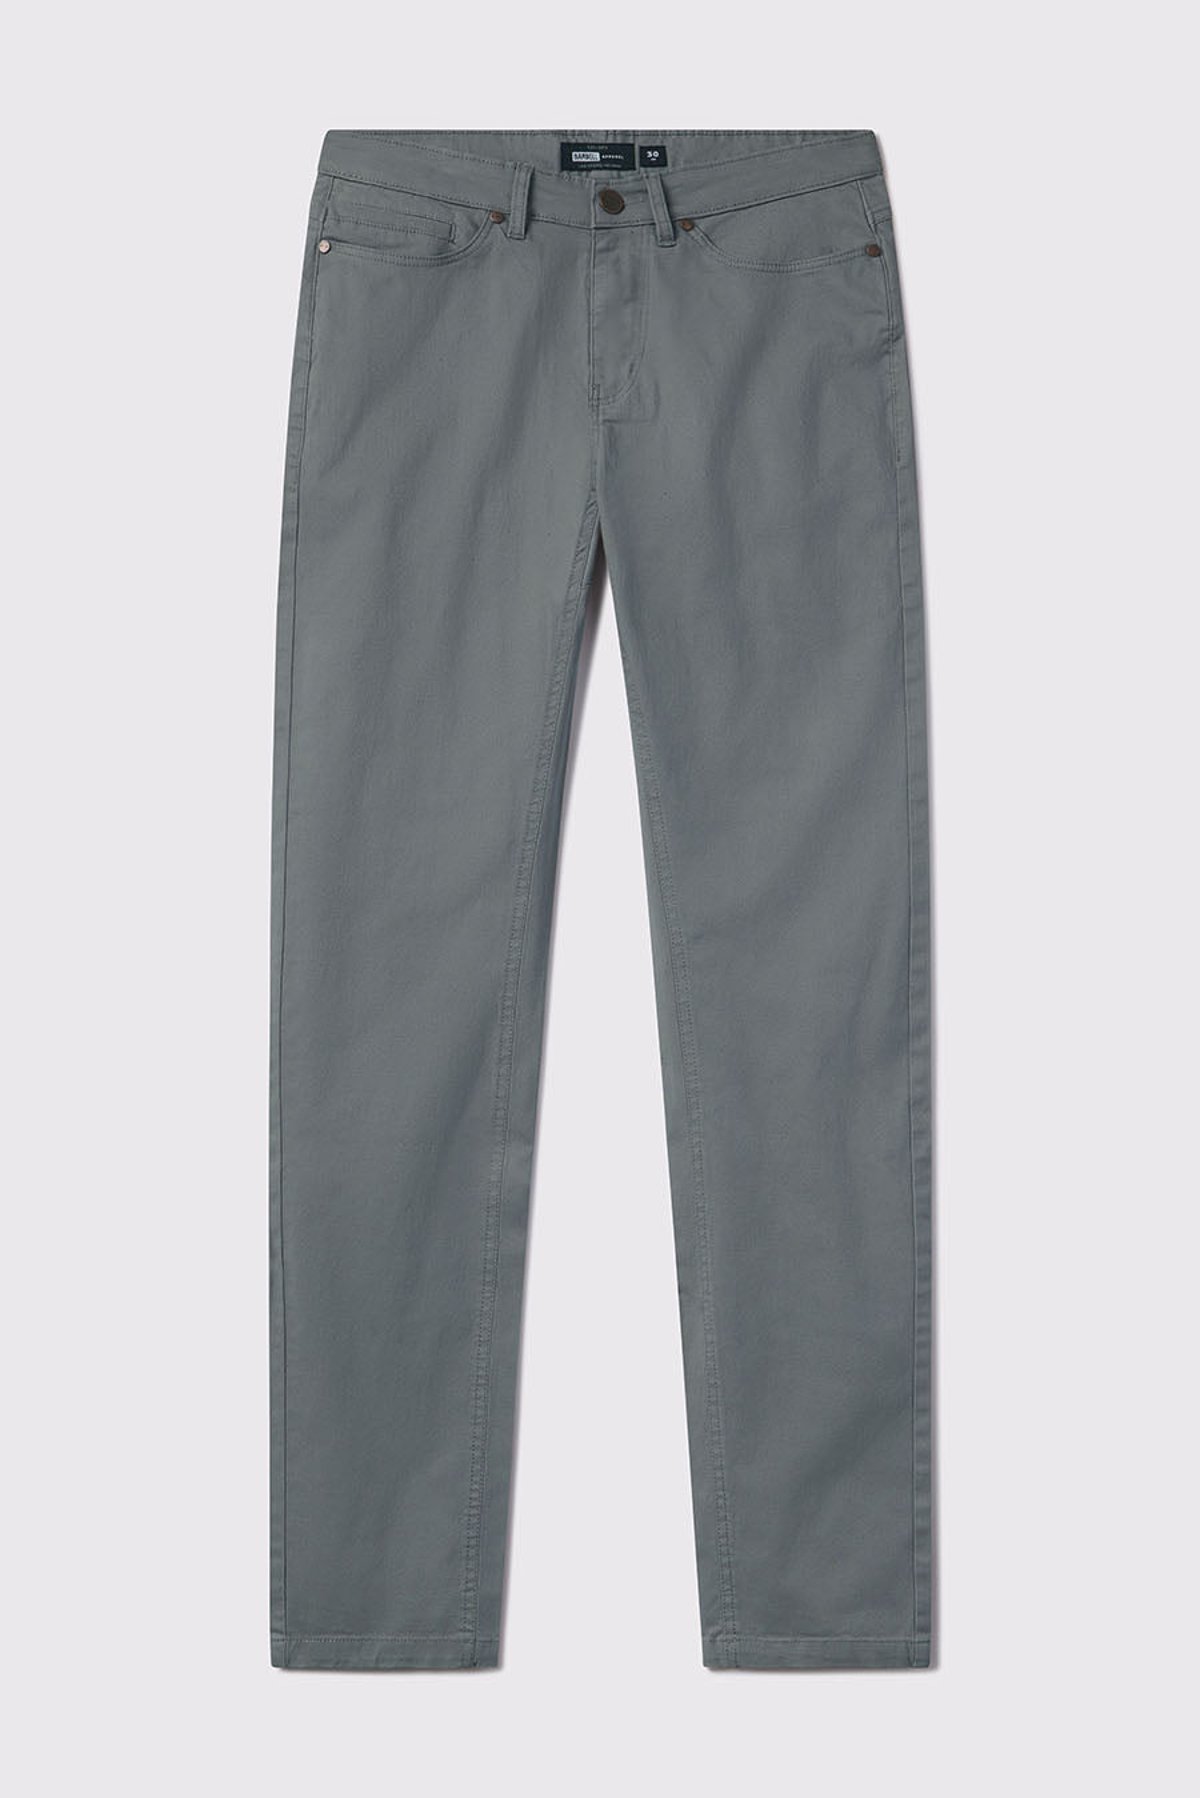 Athletic Fit Chino Pant